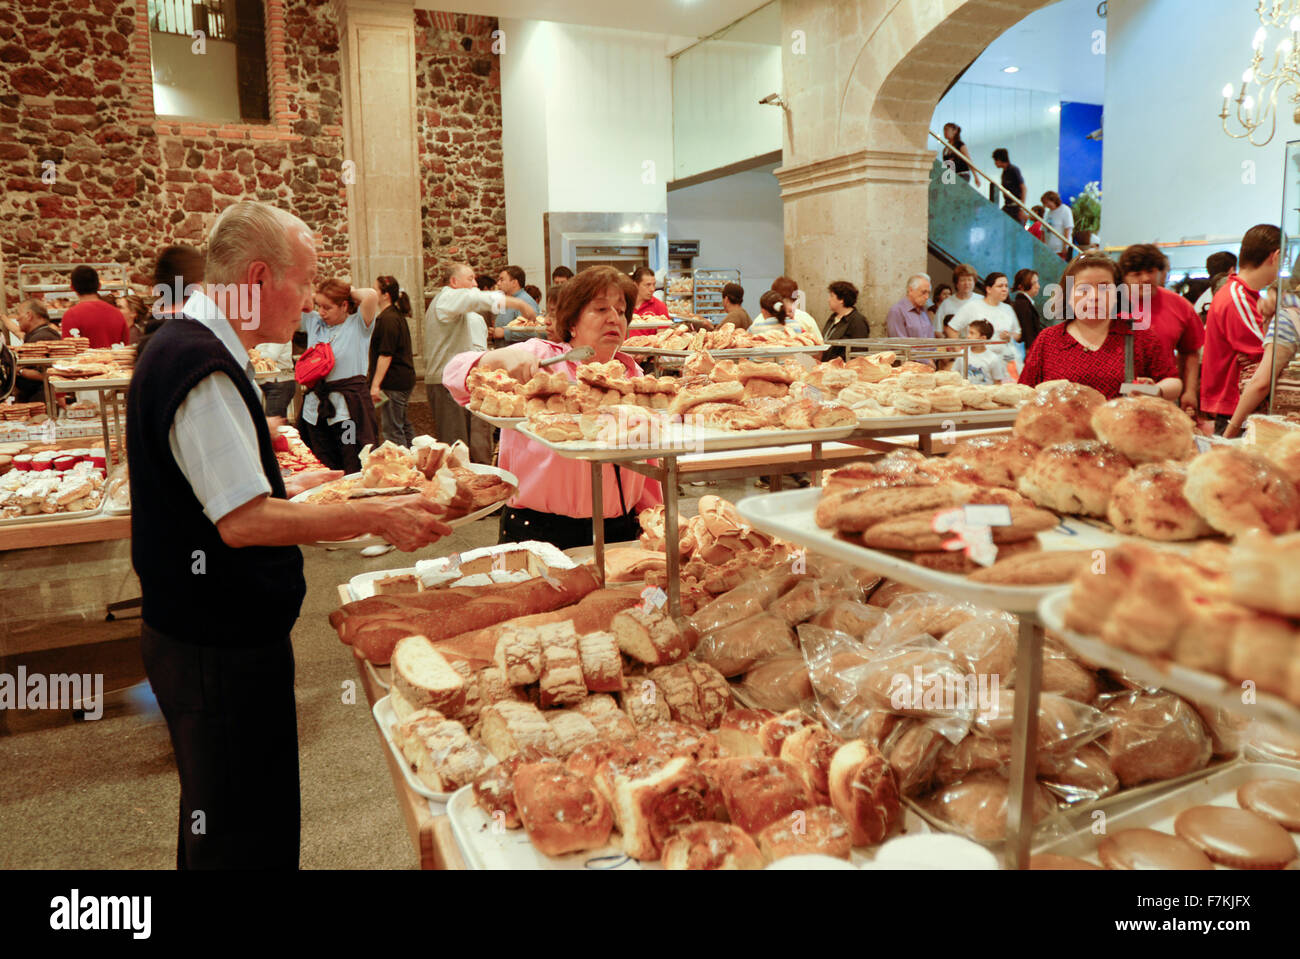 Pasteleria Ideal (Ideal Pastries) in a store in the historic Centro district. Mexico City, Mexico. Stock Photo